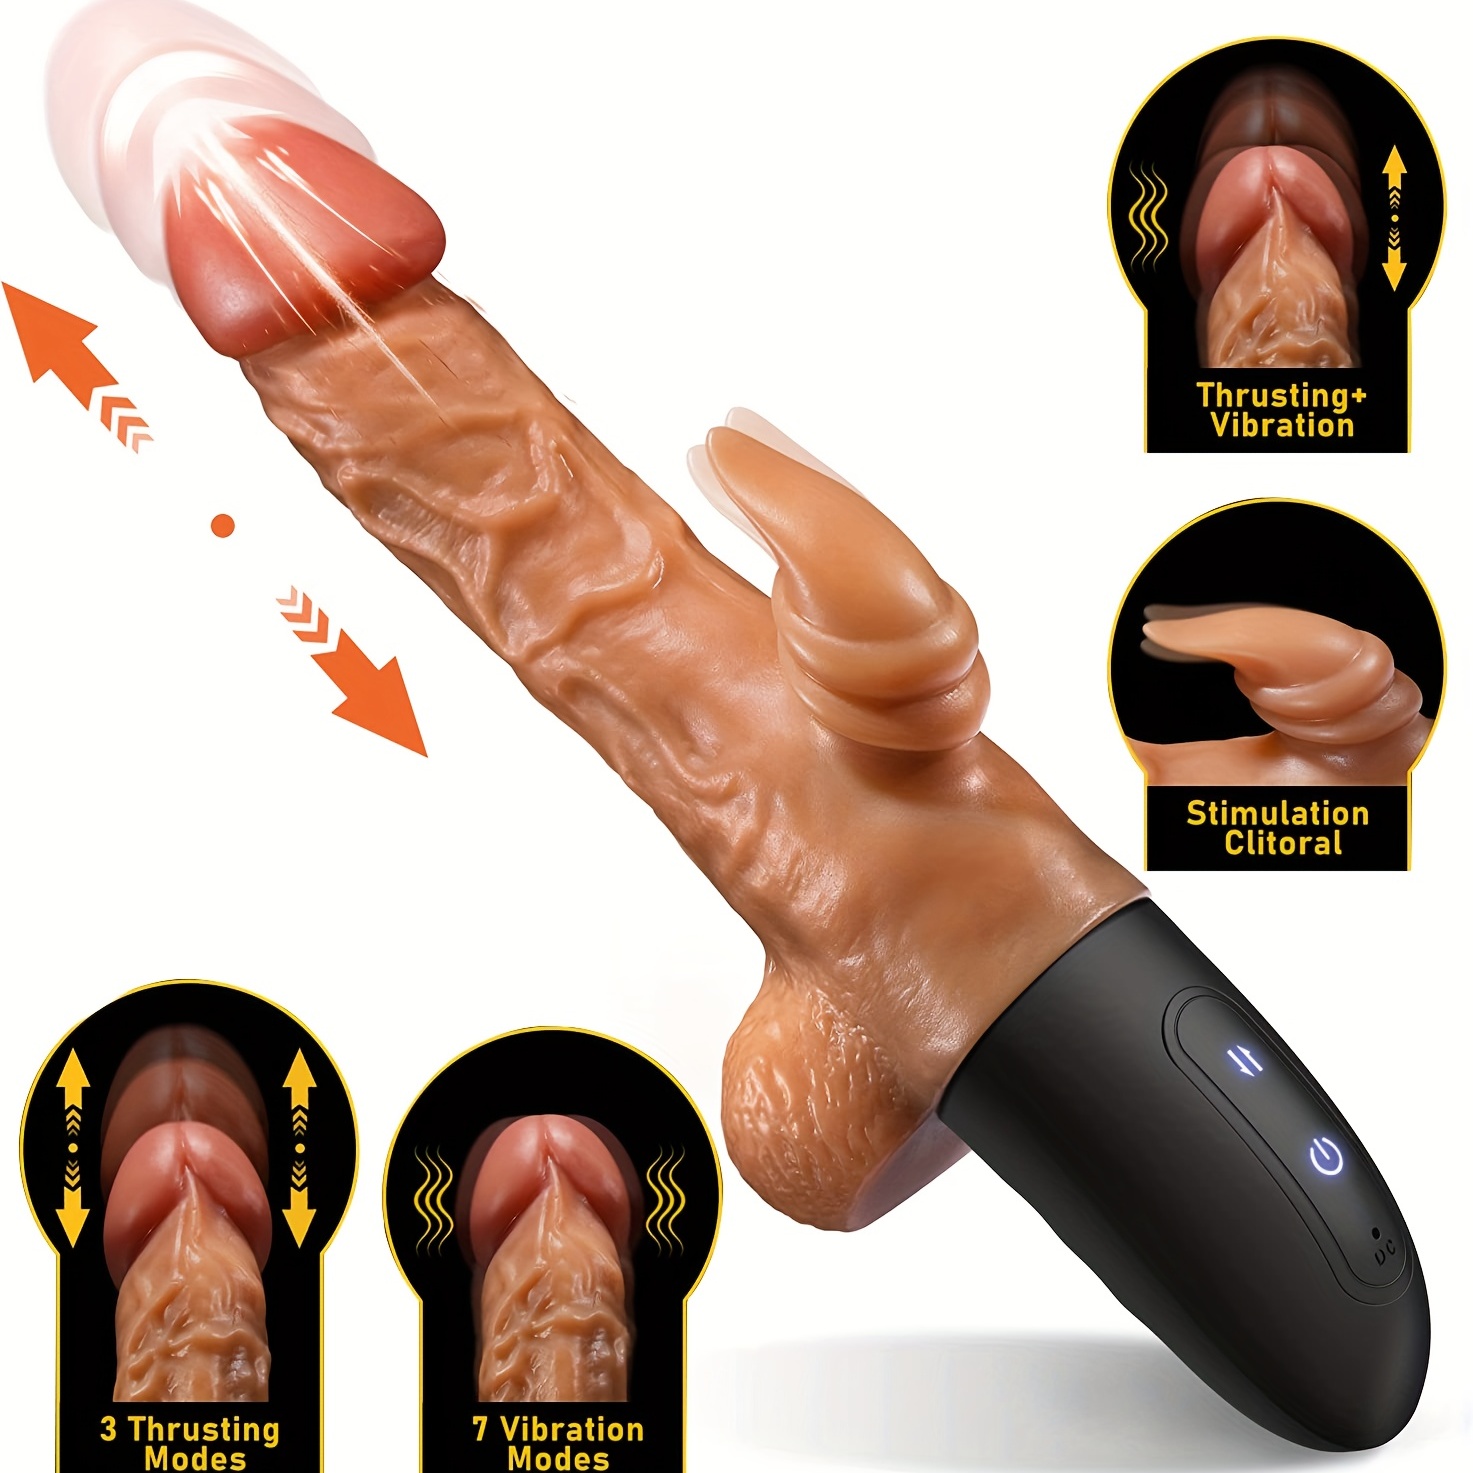 Excite Yourself Thrusting Dildo Vibrator For Women - Realistic Dildo Adult Sex Toys For Couple Pleasure and G-spot Stimulation With 3 Thrusting and 7 Vibrating Modes image